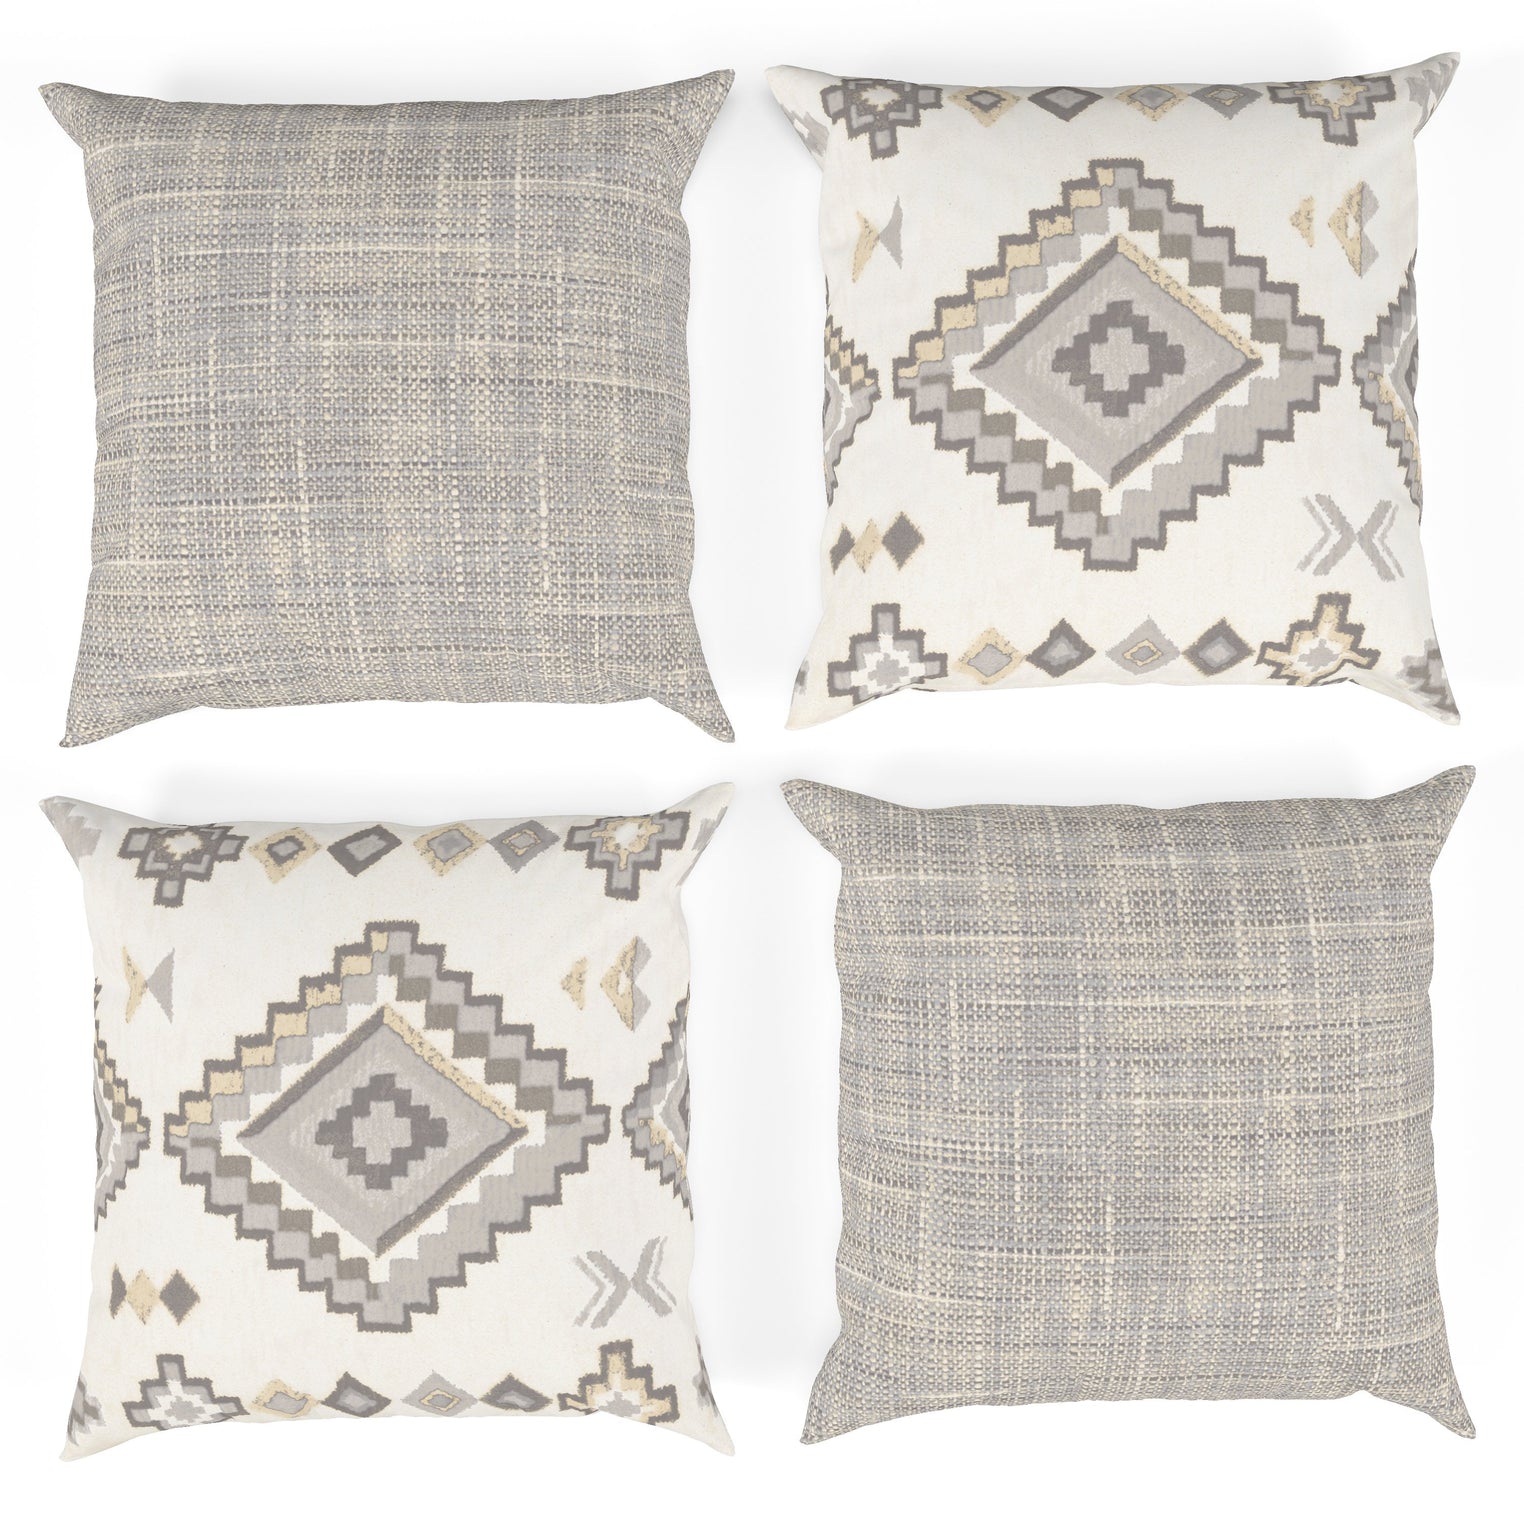 Texture and Tribal Print Pillow Covers 18"